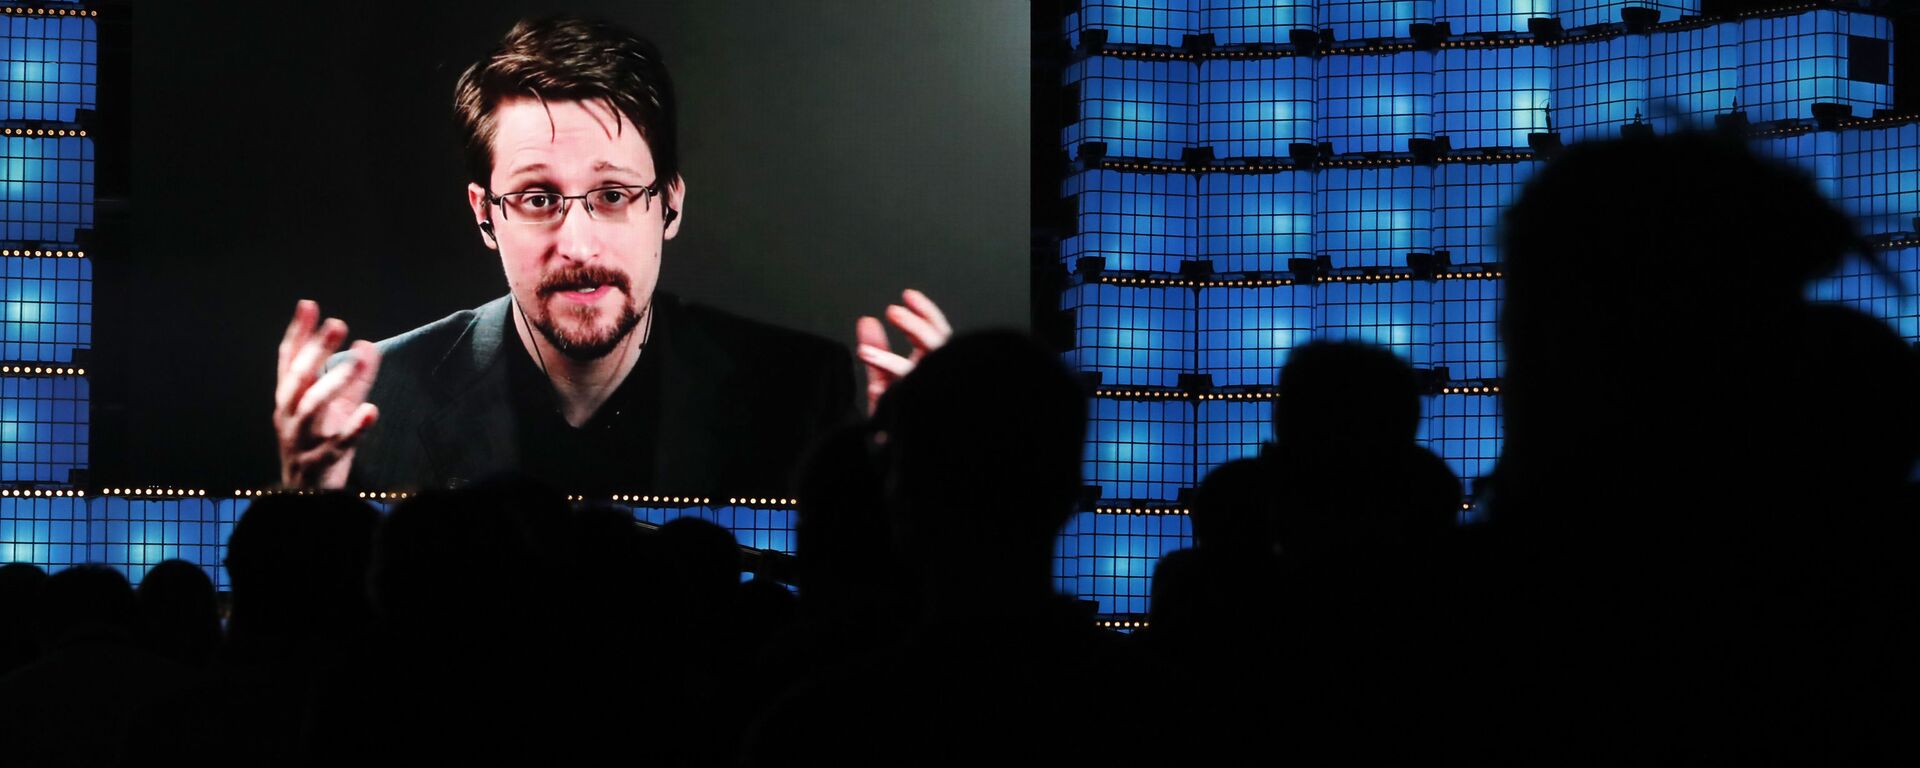 Former U.S. National Security Agency contractor Edward Snowden addresses attendees through video link at the Web Summit technology conference in Lisbon, Monday, Nov. 4, 2019 - Sputnik International, 1920, 03.10.2021